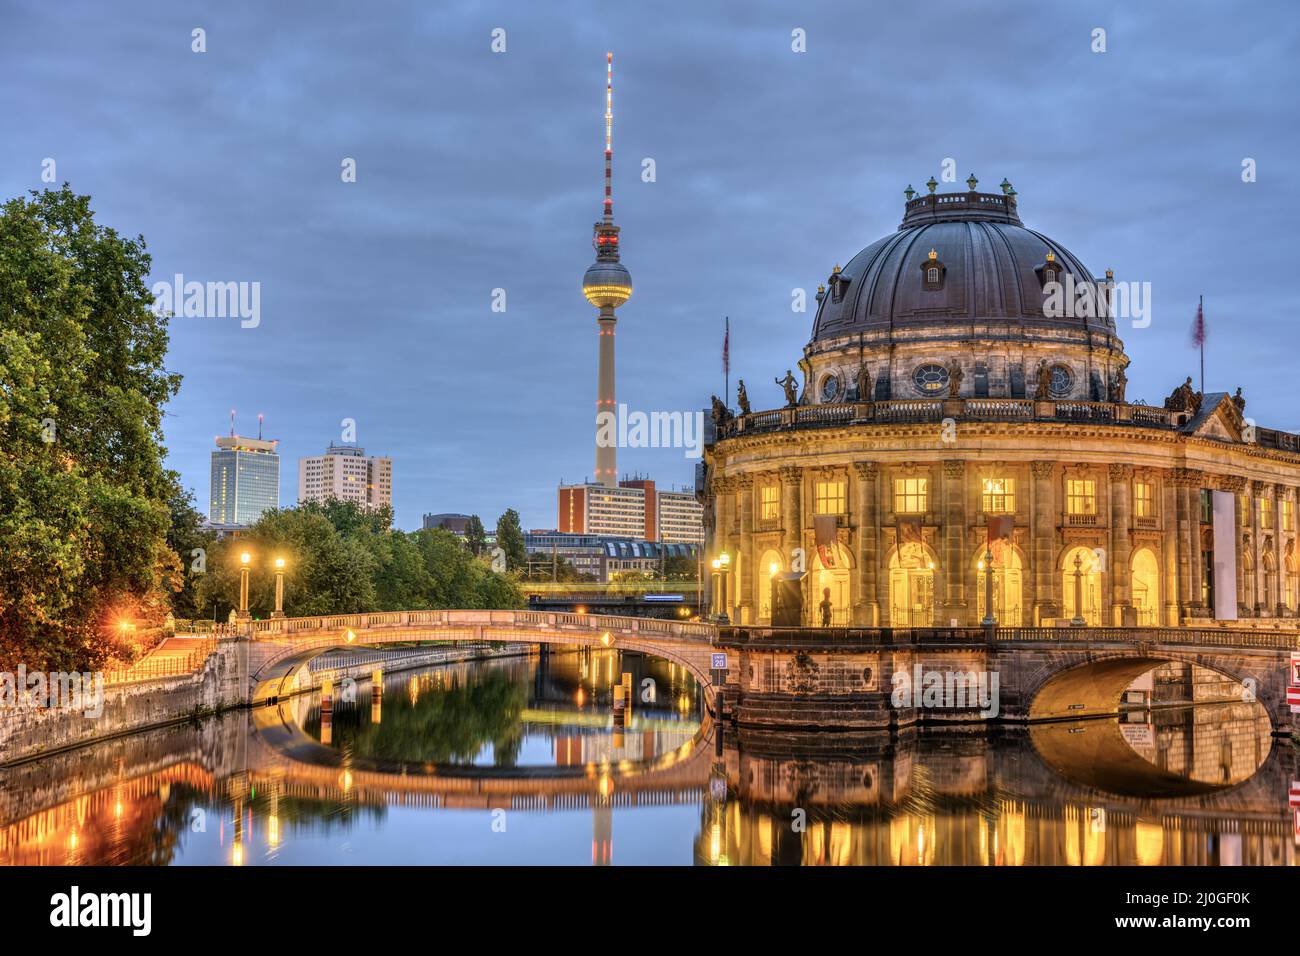 The Bode Museum, the Television Tower and the river Spree in Berlin at twilight Stock Photo